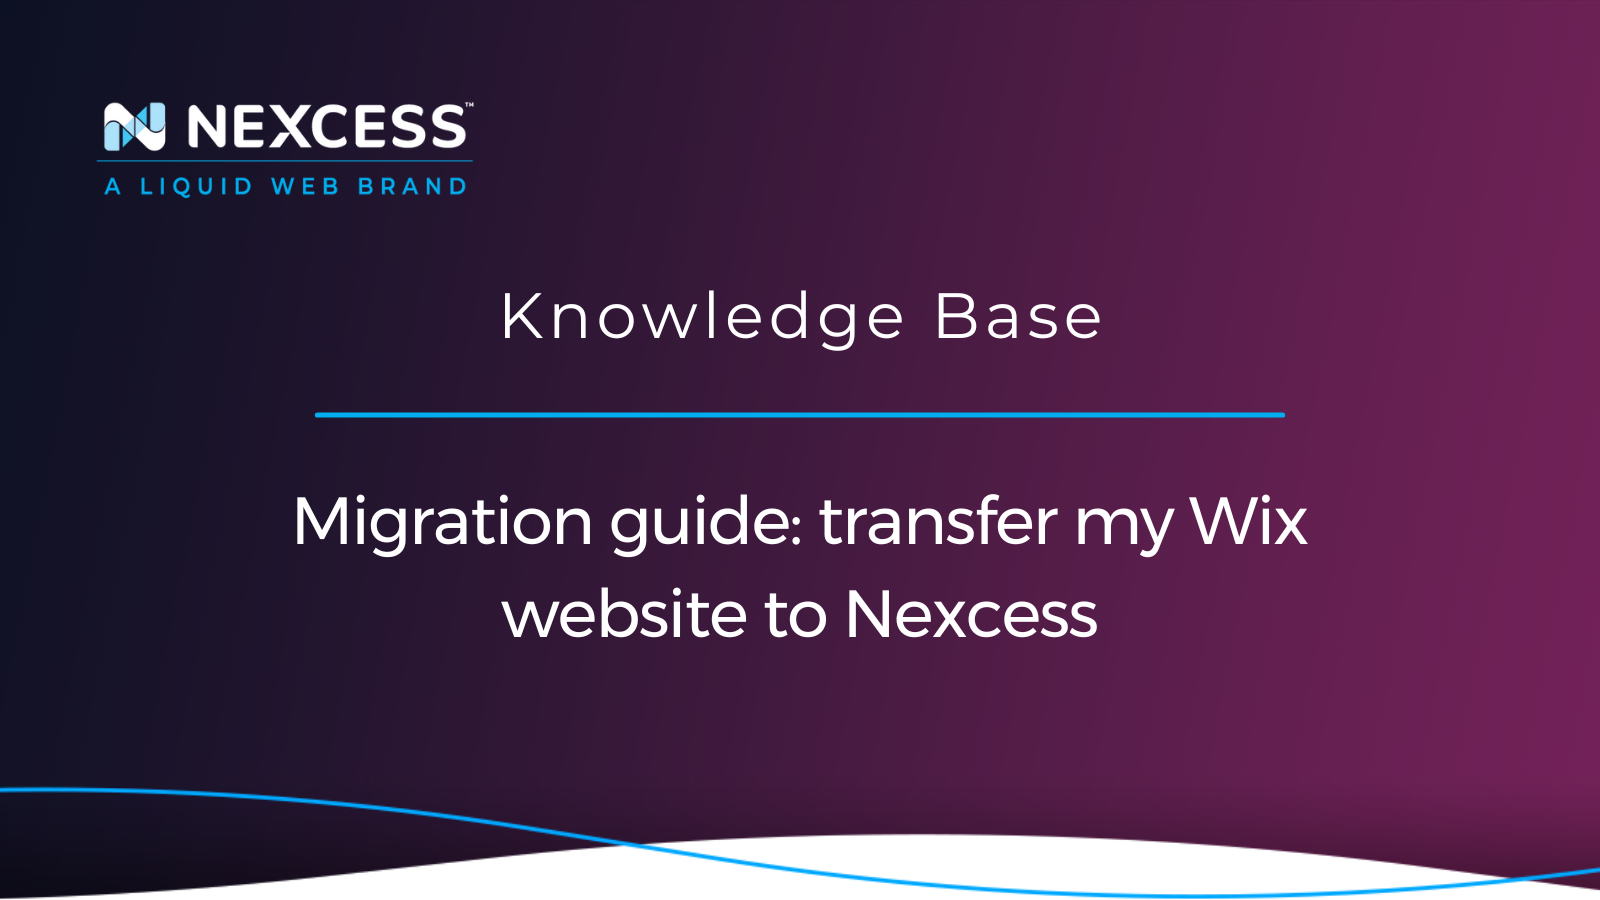 Migration guide: transfer my Wix website to Nexcess 